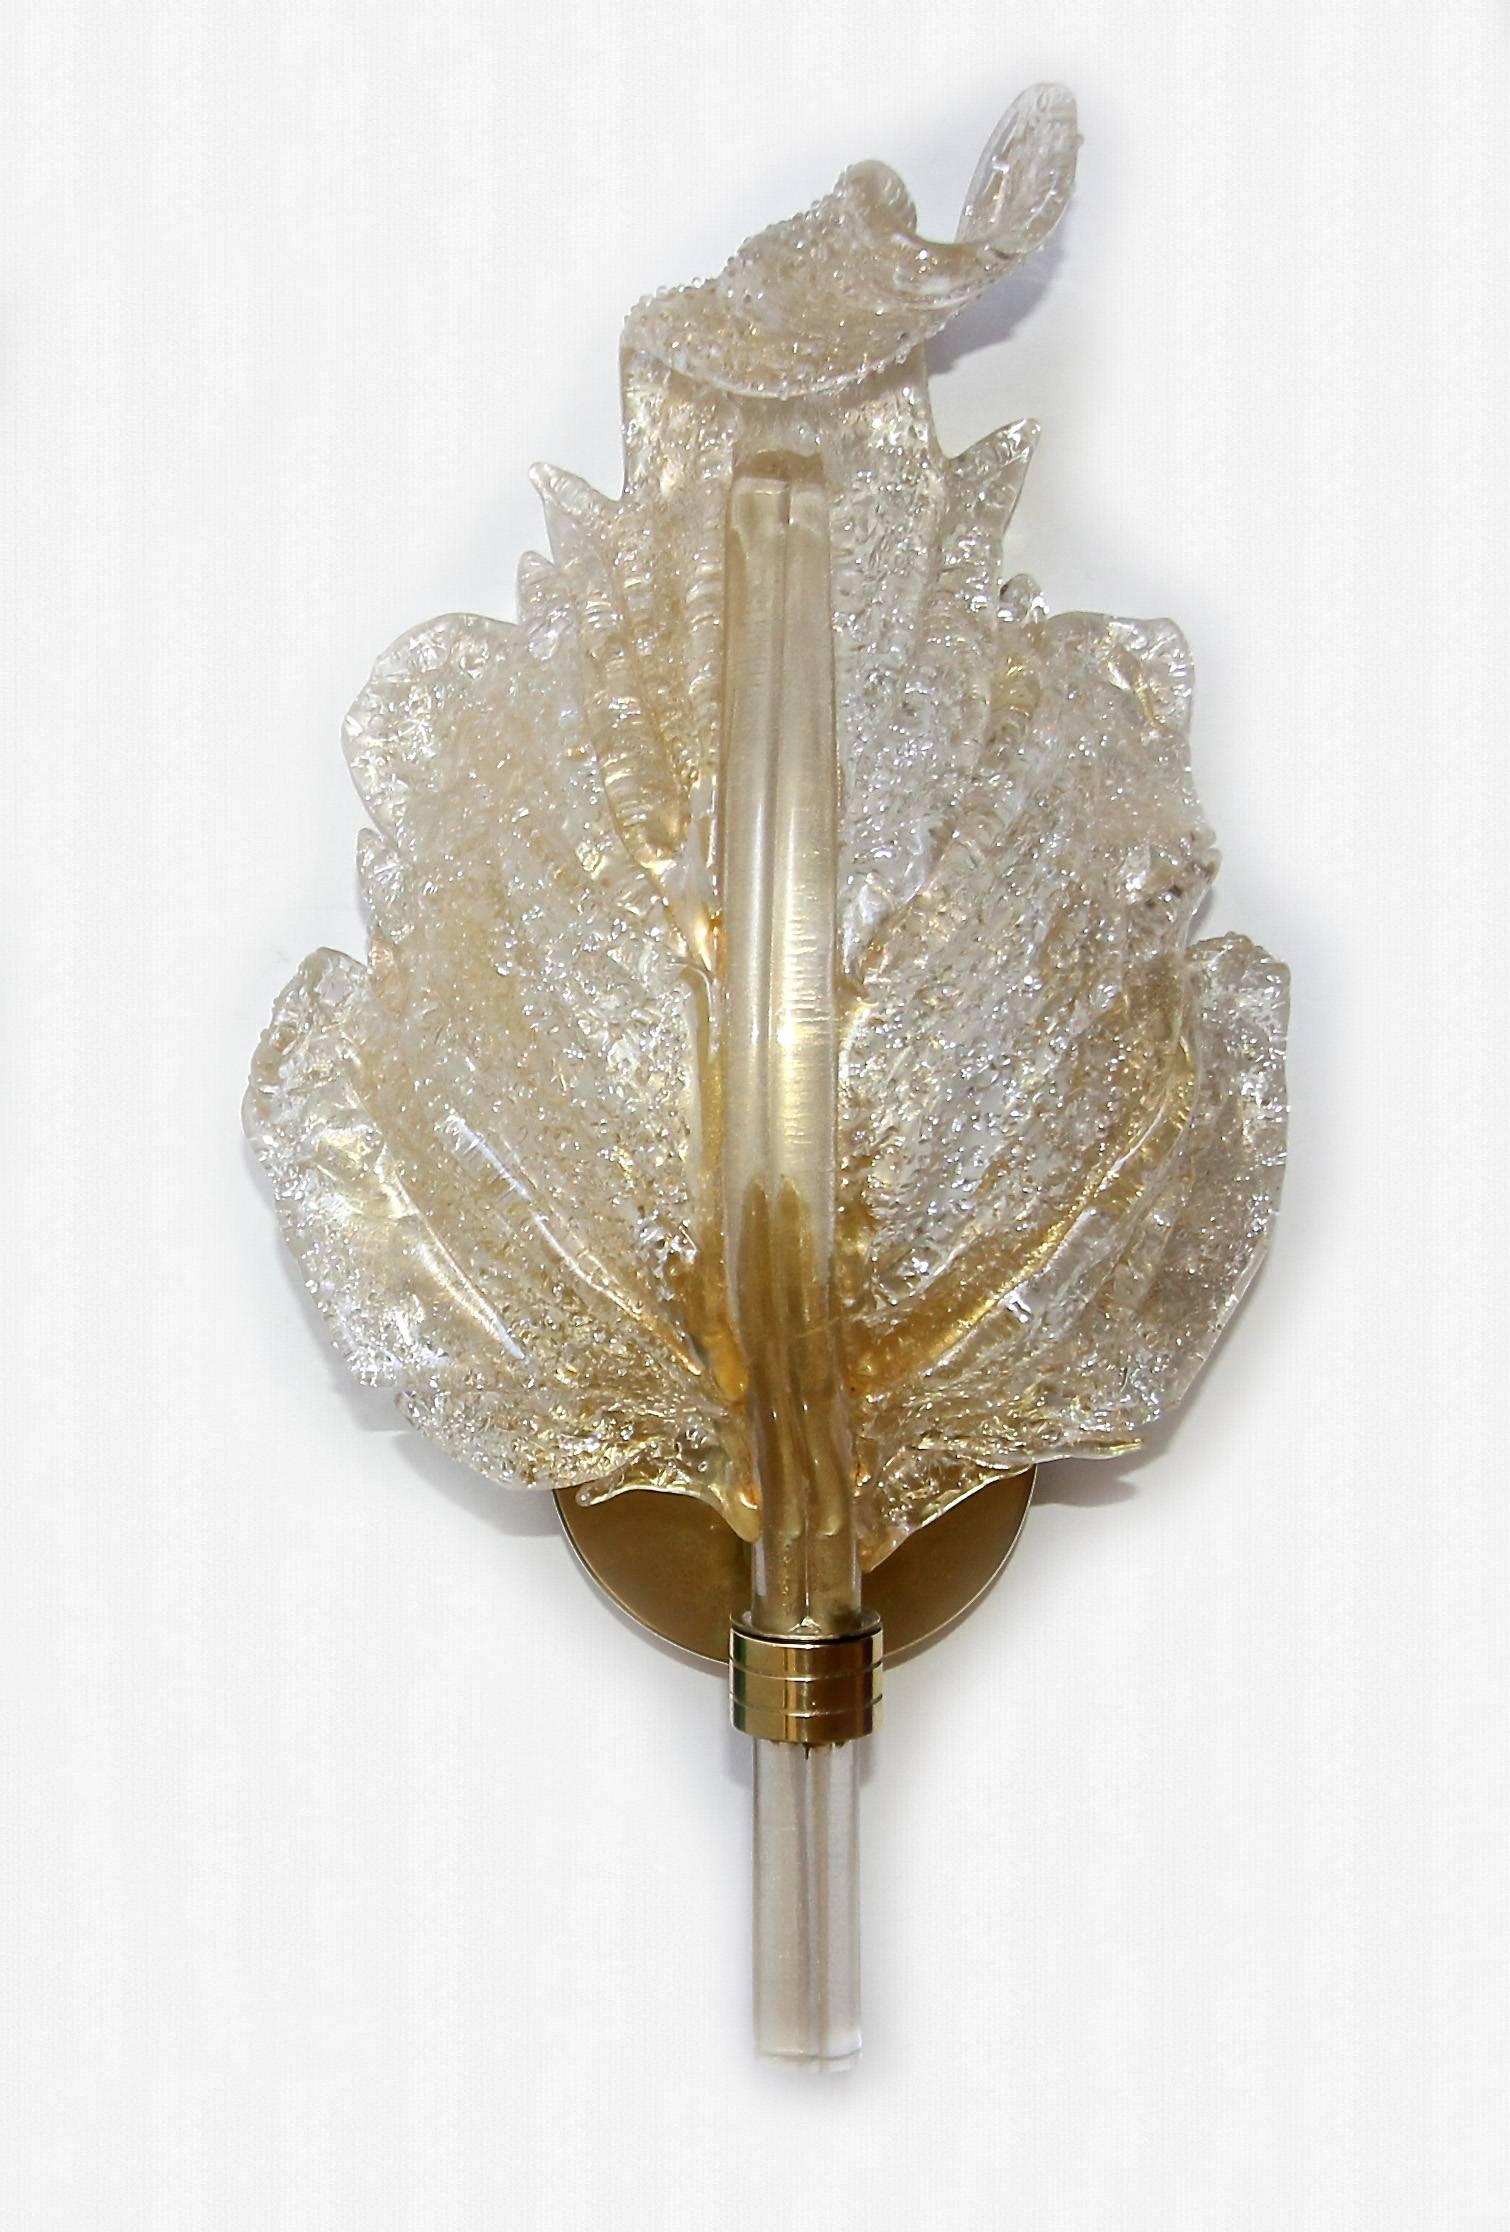 Single (one) handblown Barovier glass leaf wall sconce in in clear with heavy gold inclusions. Rugiodoso technique to back of leaf with scattered particles of glass to help diffuse light. Supported on brass backplate, fixture uses one candelabra